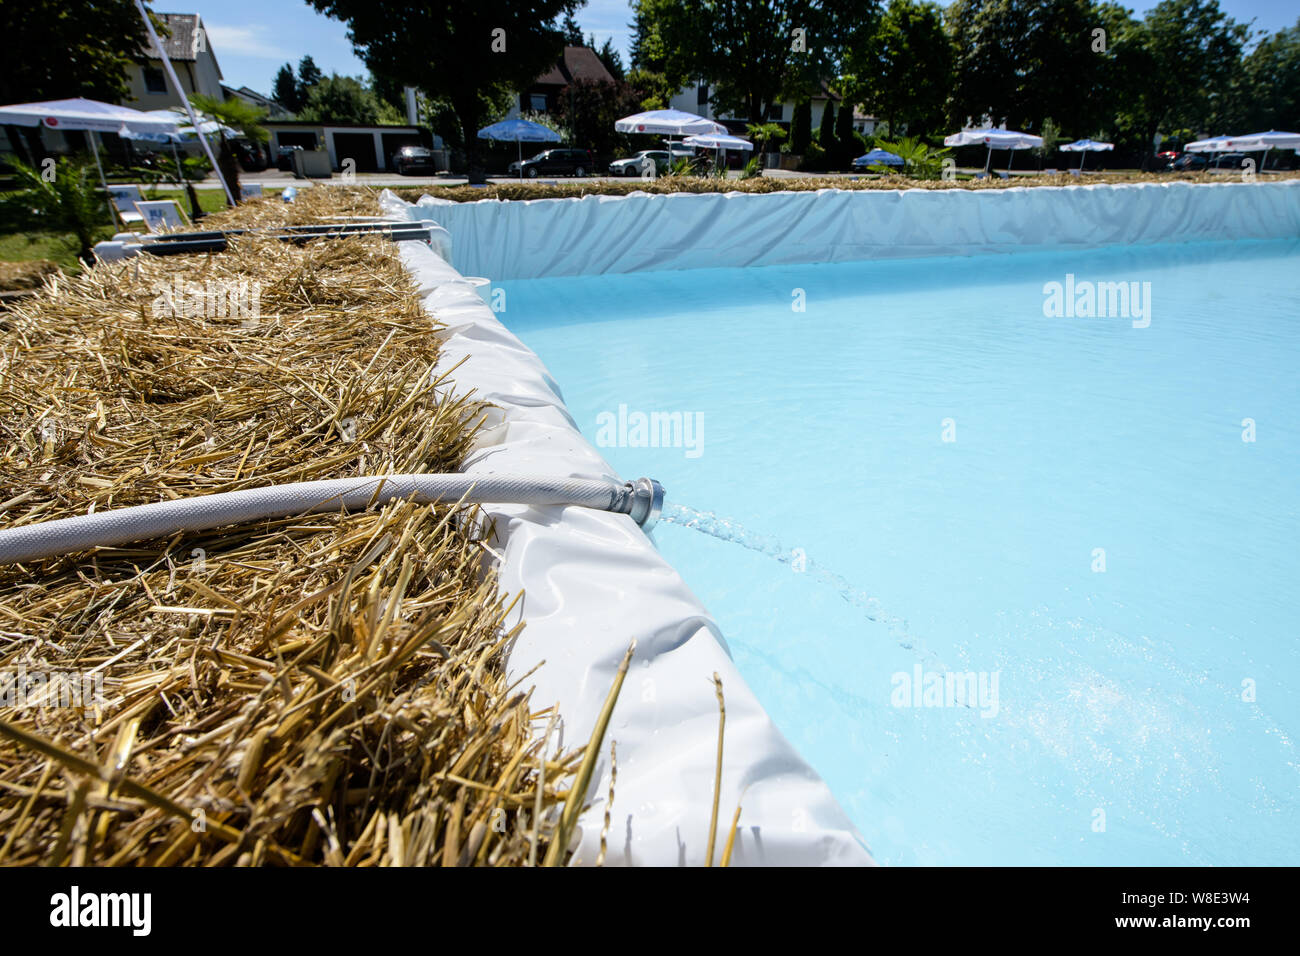 Hay Bale Pool High Resolution Stock Photography And Images Alamy